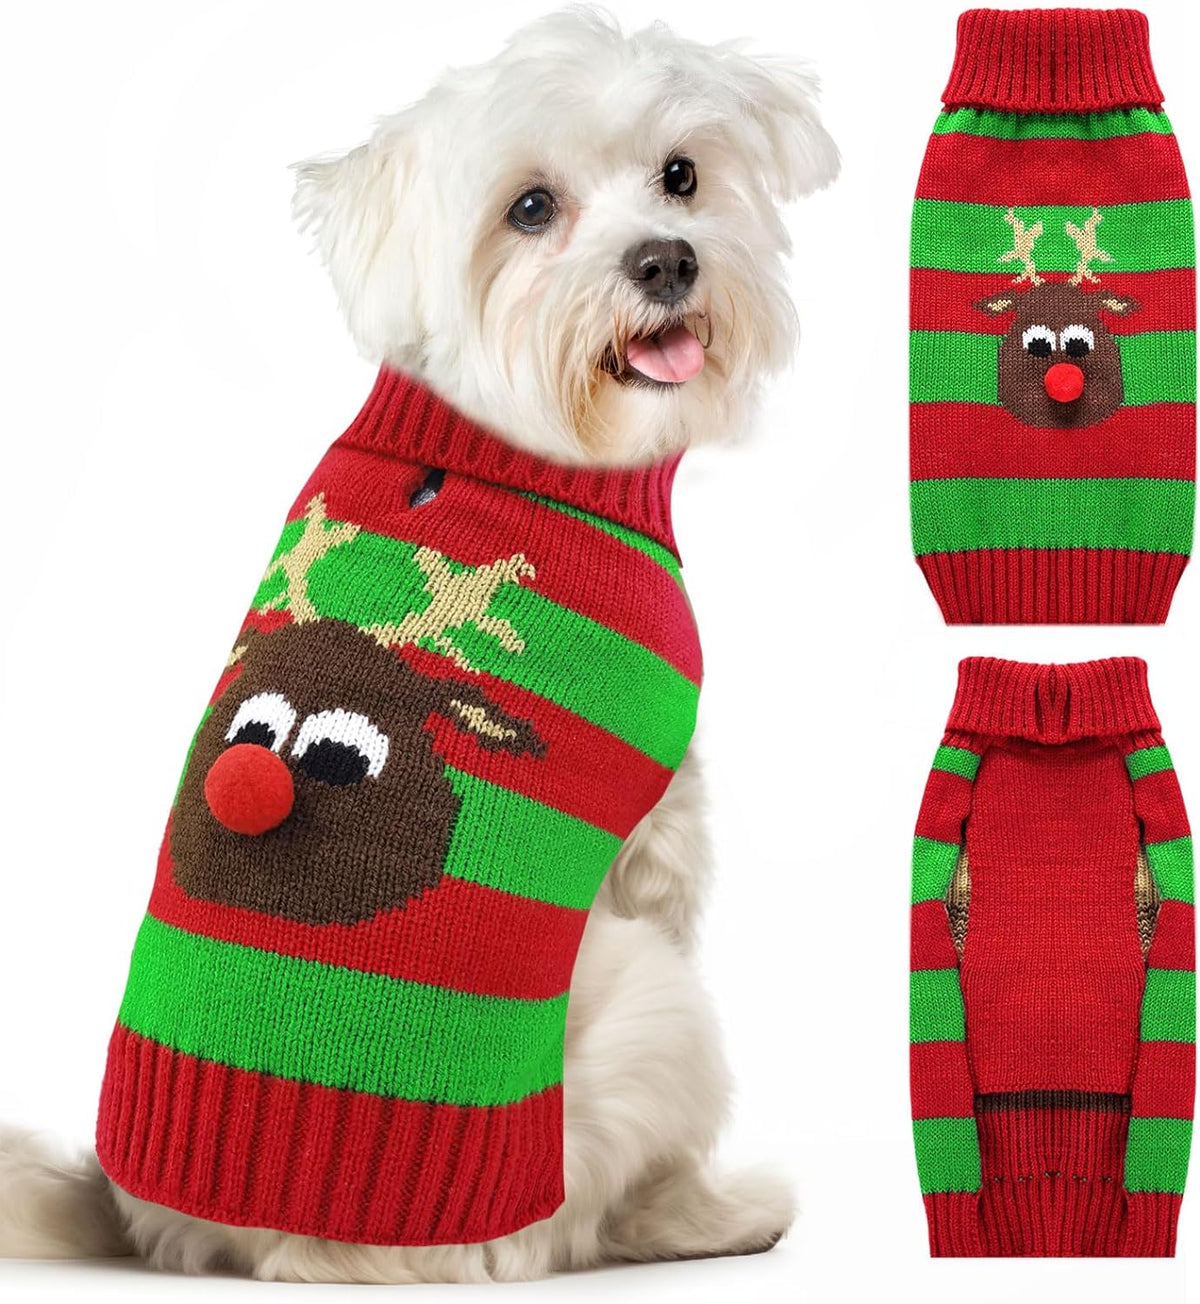 KUTKUT Dog Christmas Sweater Cute Striped Elk Dog Knitted Pullover for Small Medium Large Dogs Cats Warm Xmas Puppy Knit Jumper New Year Fall Winter Dog Clothes Outfits - kutkutstyle